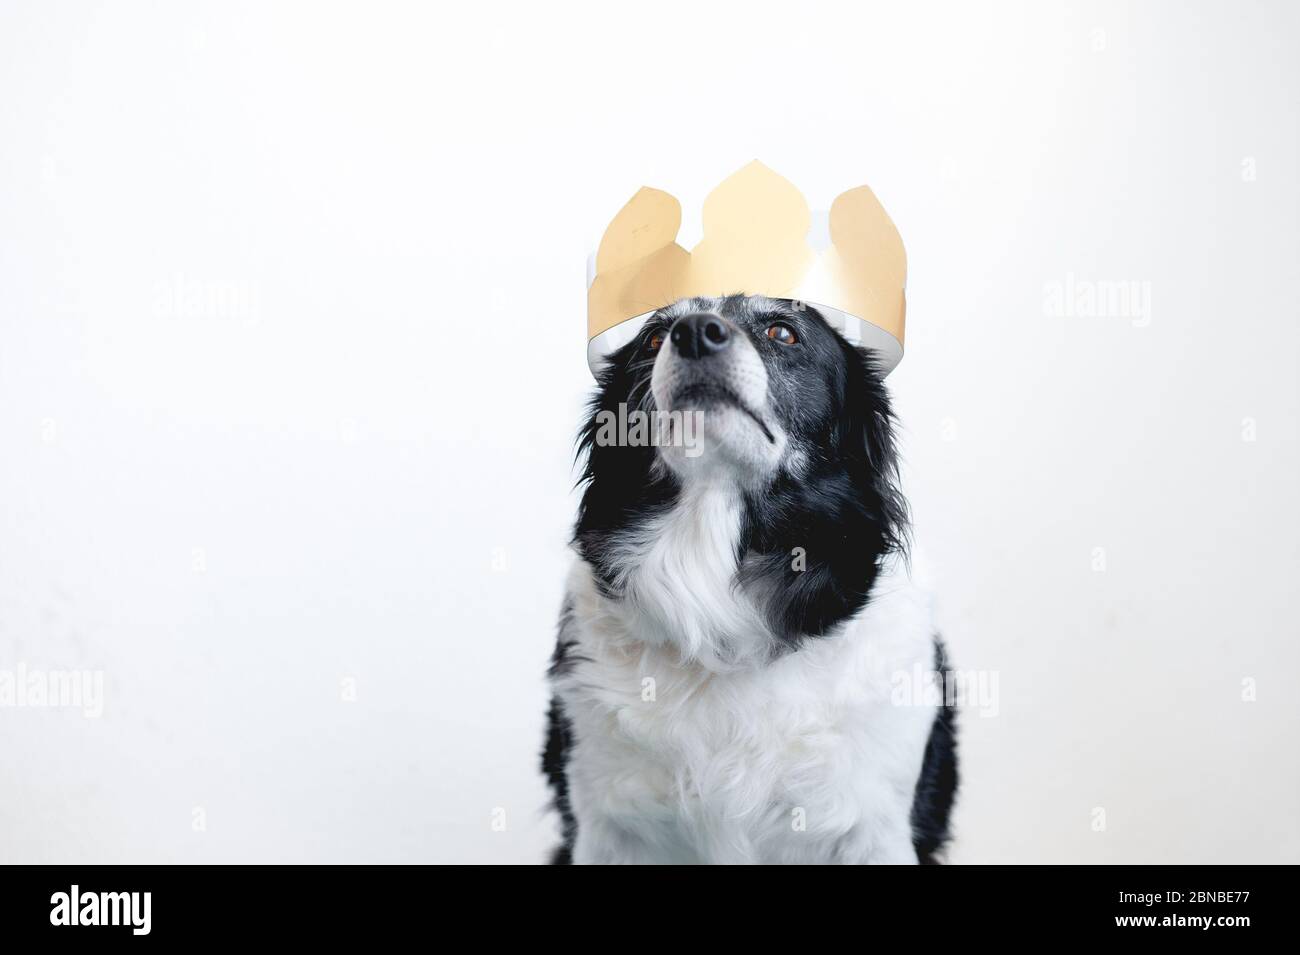 Cute black and white border collie. Dog with golden paper crown on its head. Stock Photo